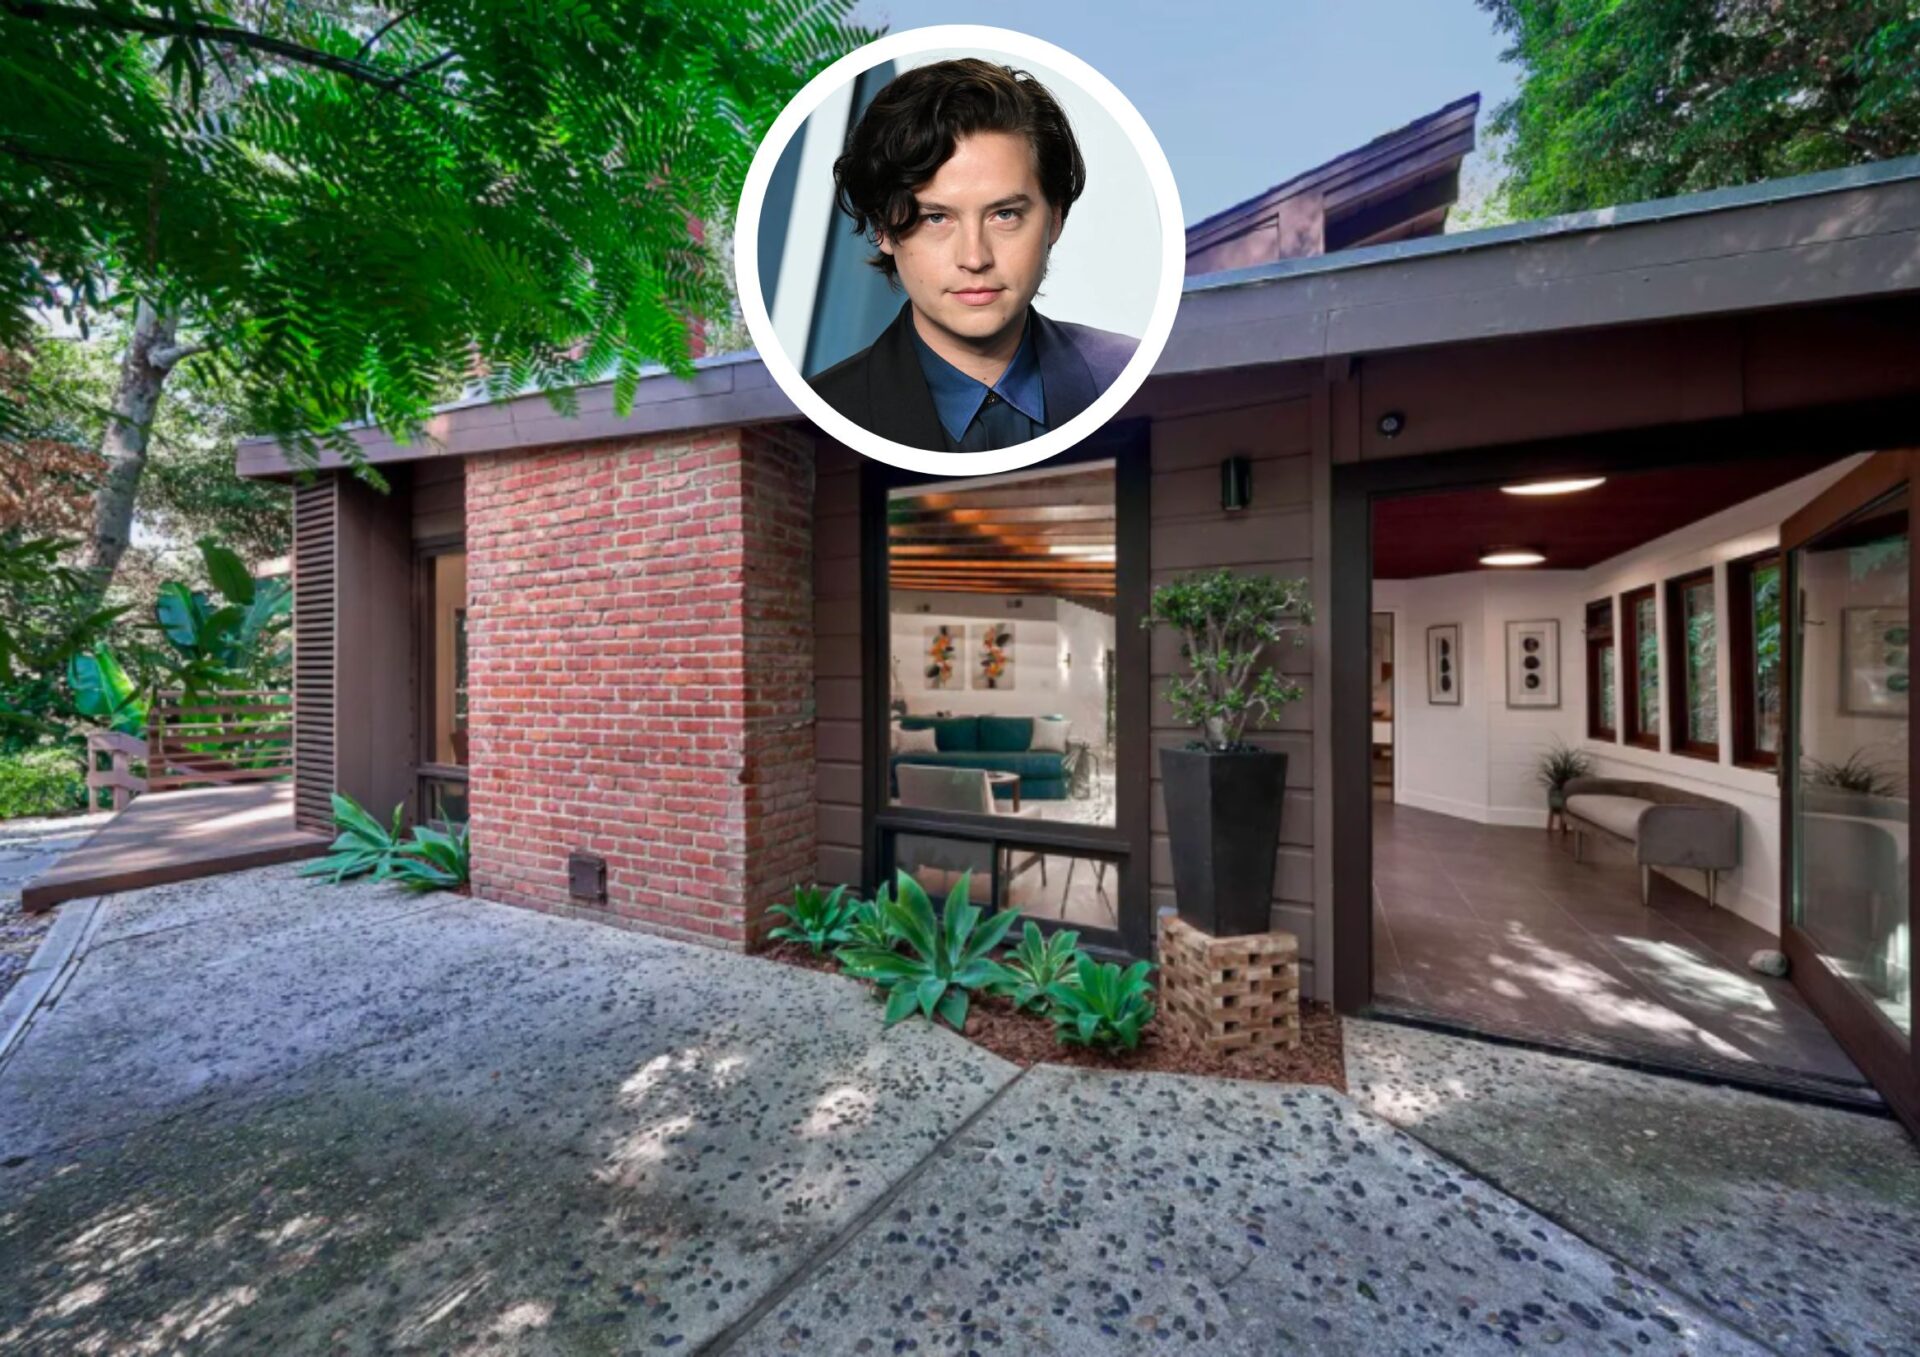 Main Image of Cole Sprouse's Estate